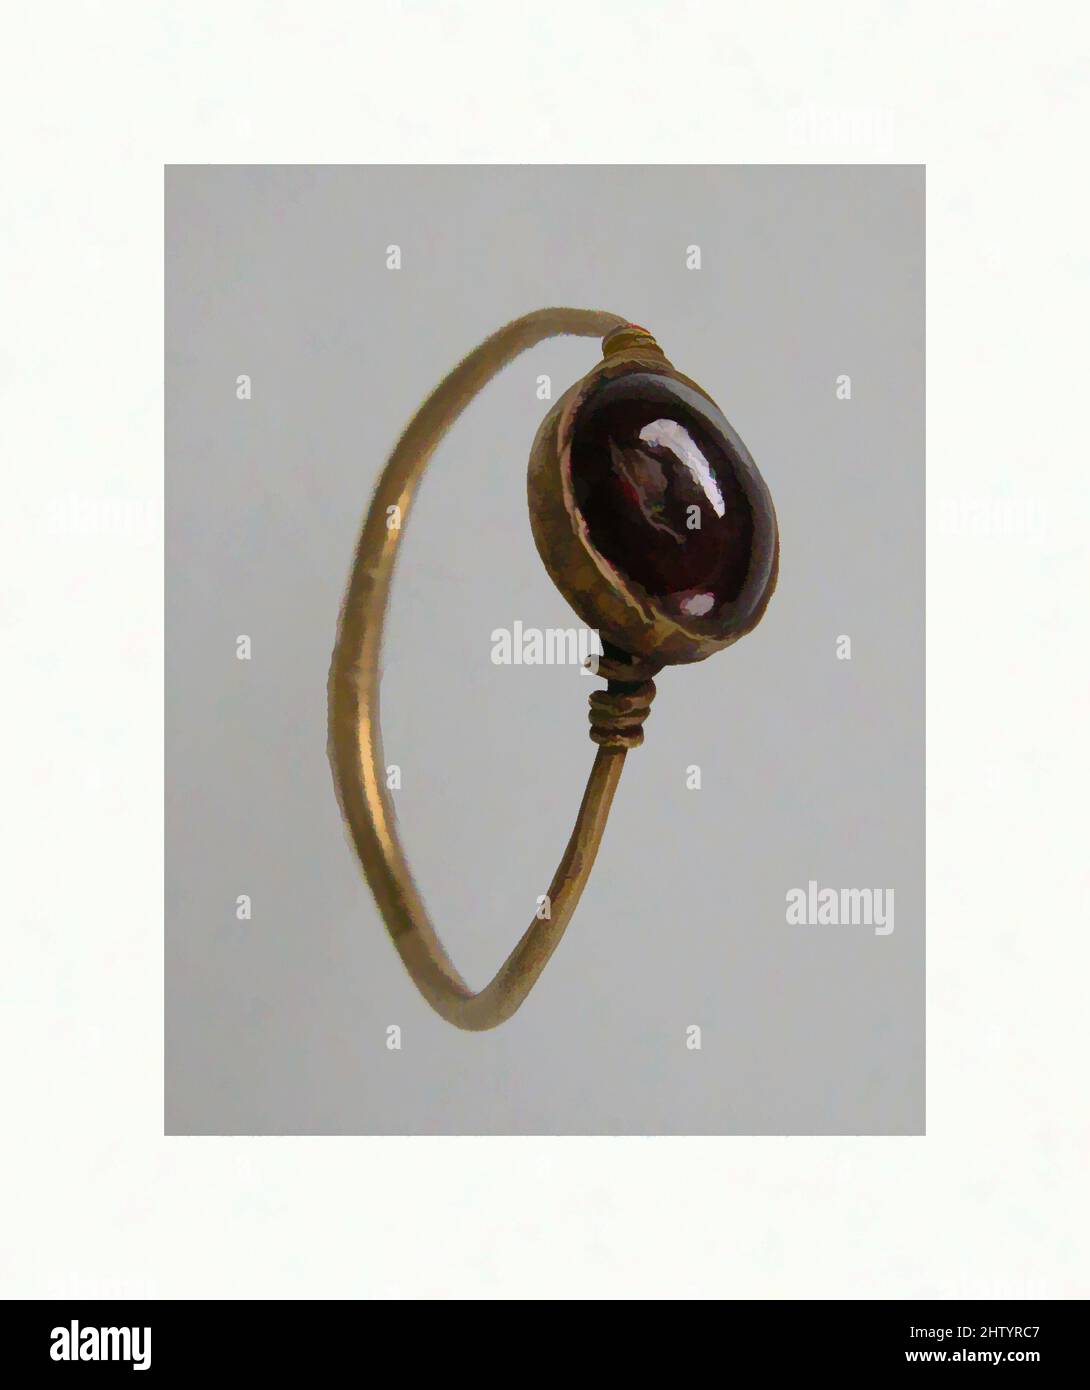 Art inspired by Finger Ring, 7th century, Made in Northern France, Frankish, Gold wire, garnet cabochon, Overall: 13/16 x 11/16 x 3/16 in. (2 x 1.7 x 0.5 cm), Metalwork-Gold, Classic works modernized by Artotop with a splash of modernity. Shapes, color and value, eye-catching visual impact on art. Emotions through freedom of artworks in a contemporary way. A timeless message pursuing a wildly creative new direction. Artists turning to the digital medium and creating the Artotop NFT Stock Photo